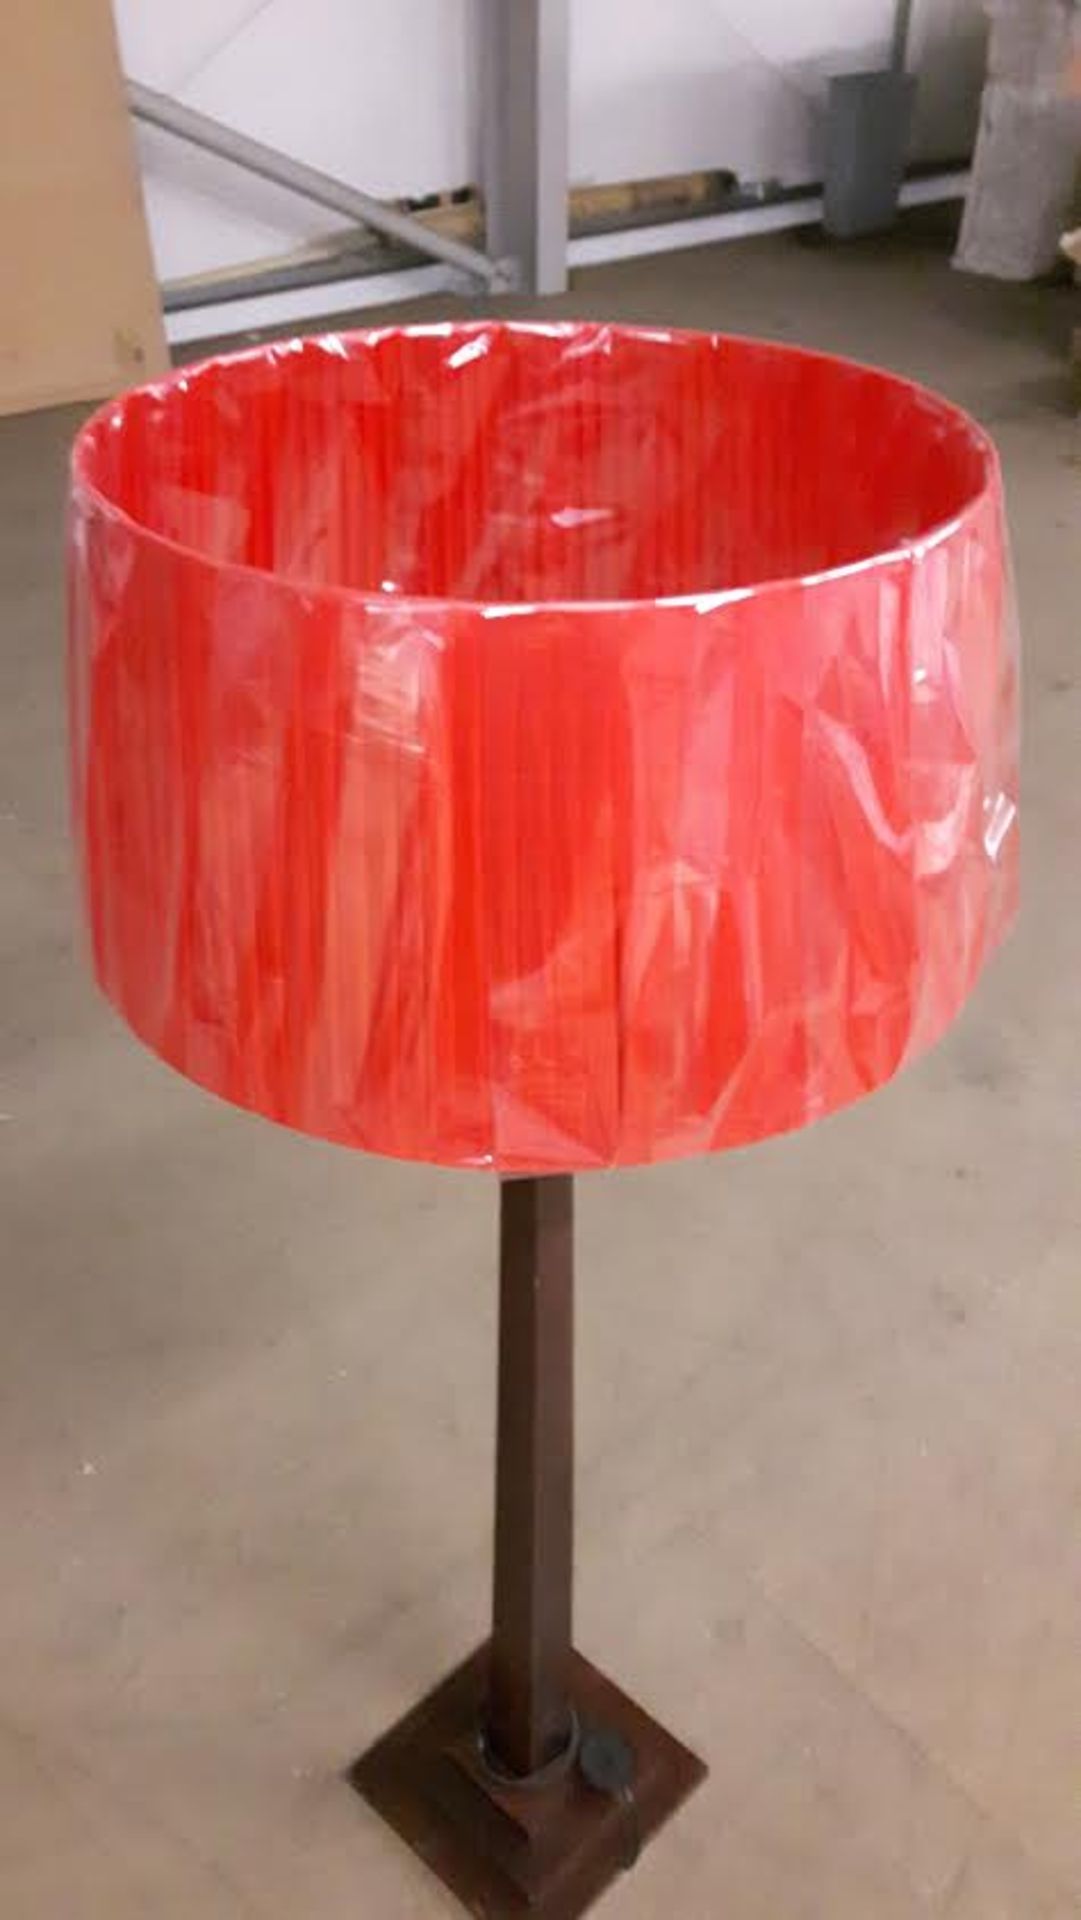 Wooden Floor Lamp with new red shade. - Image 2 of 3